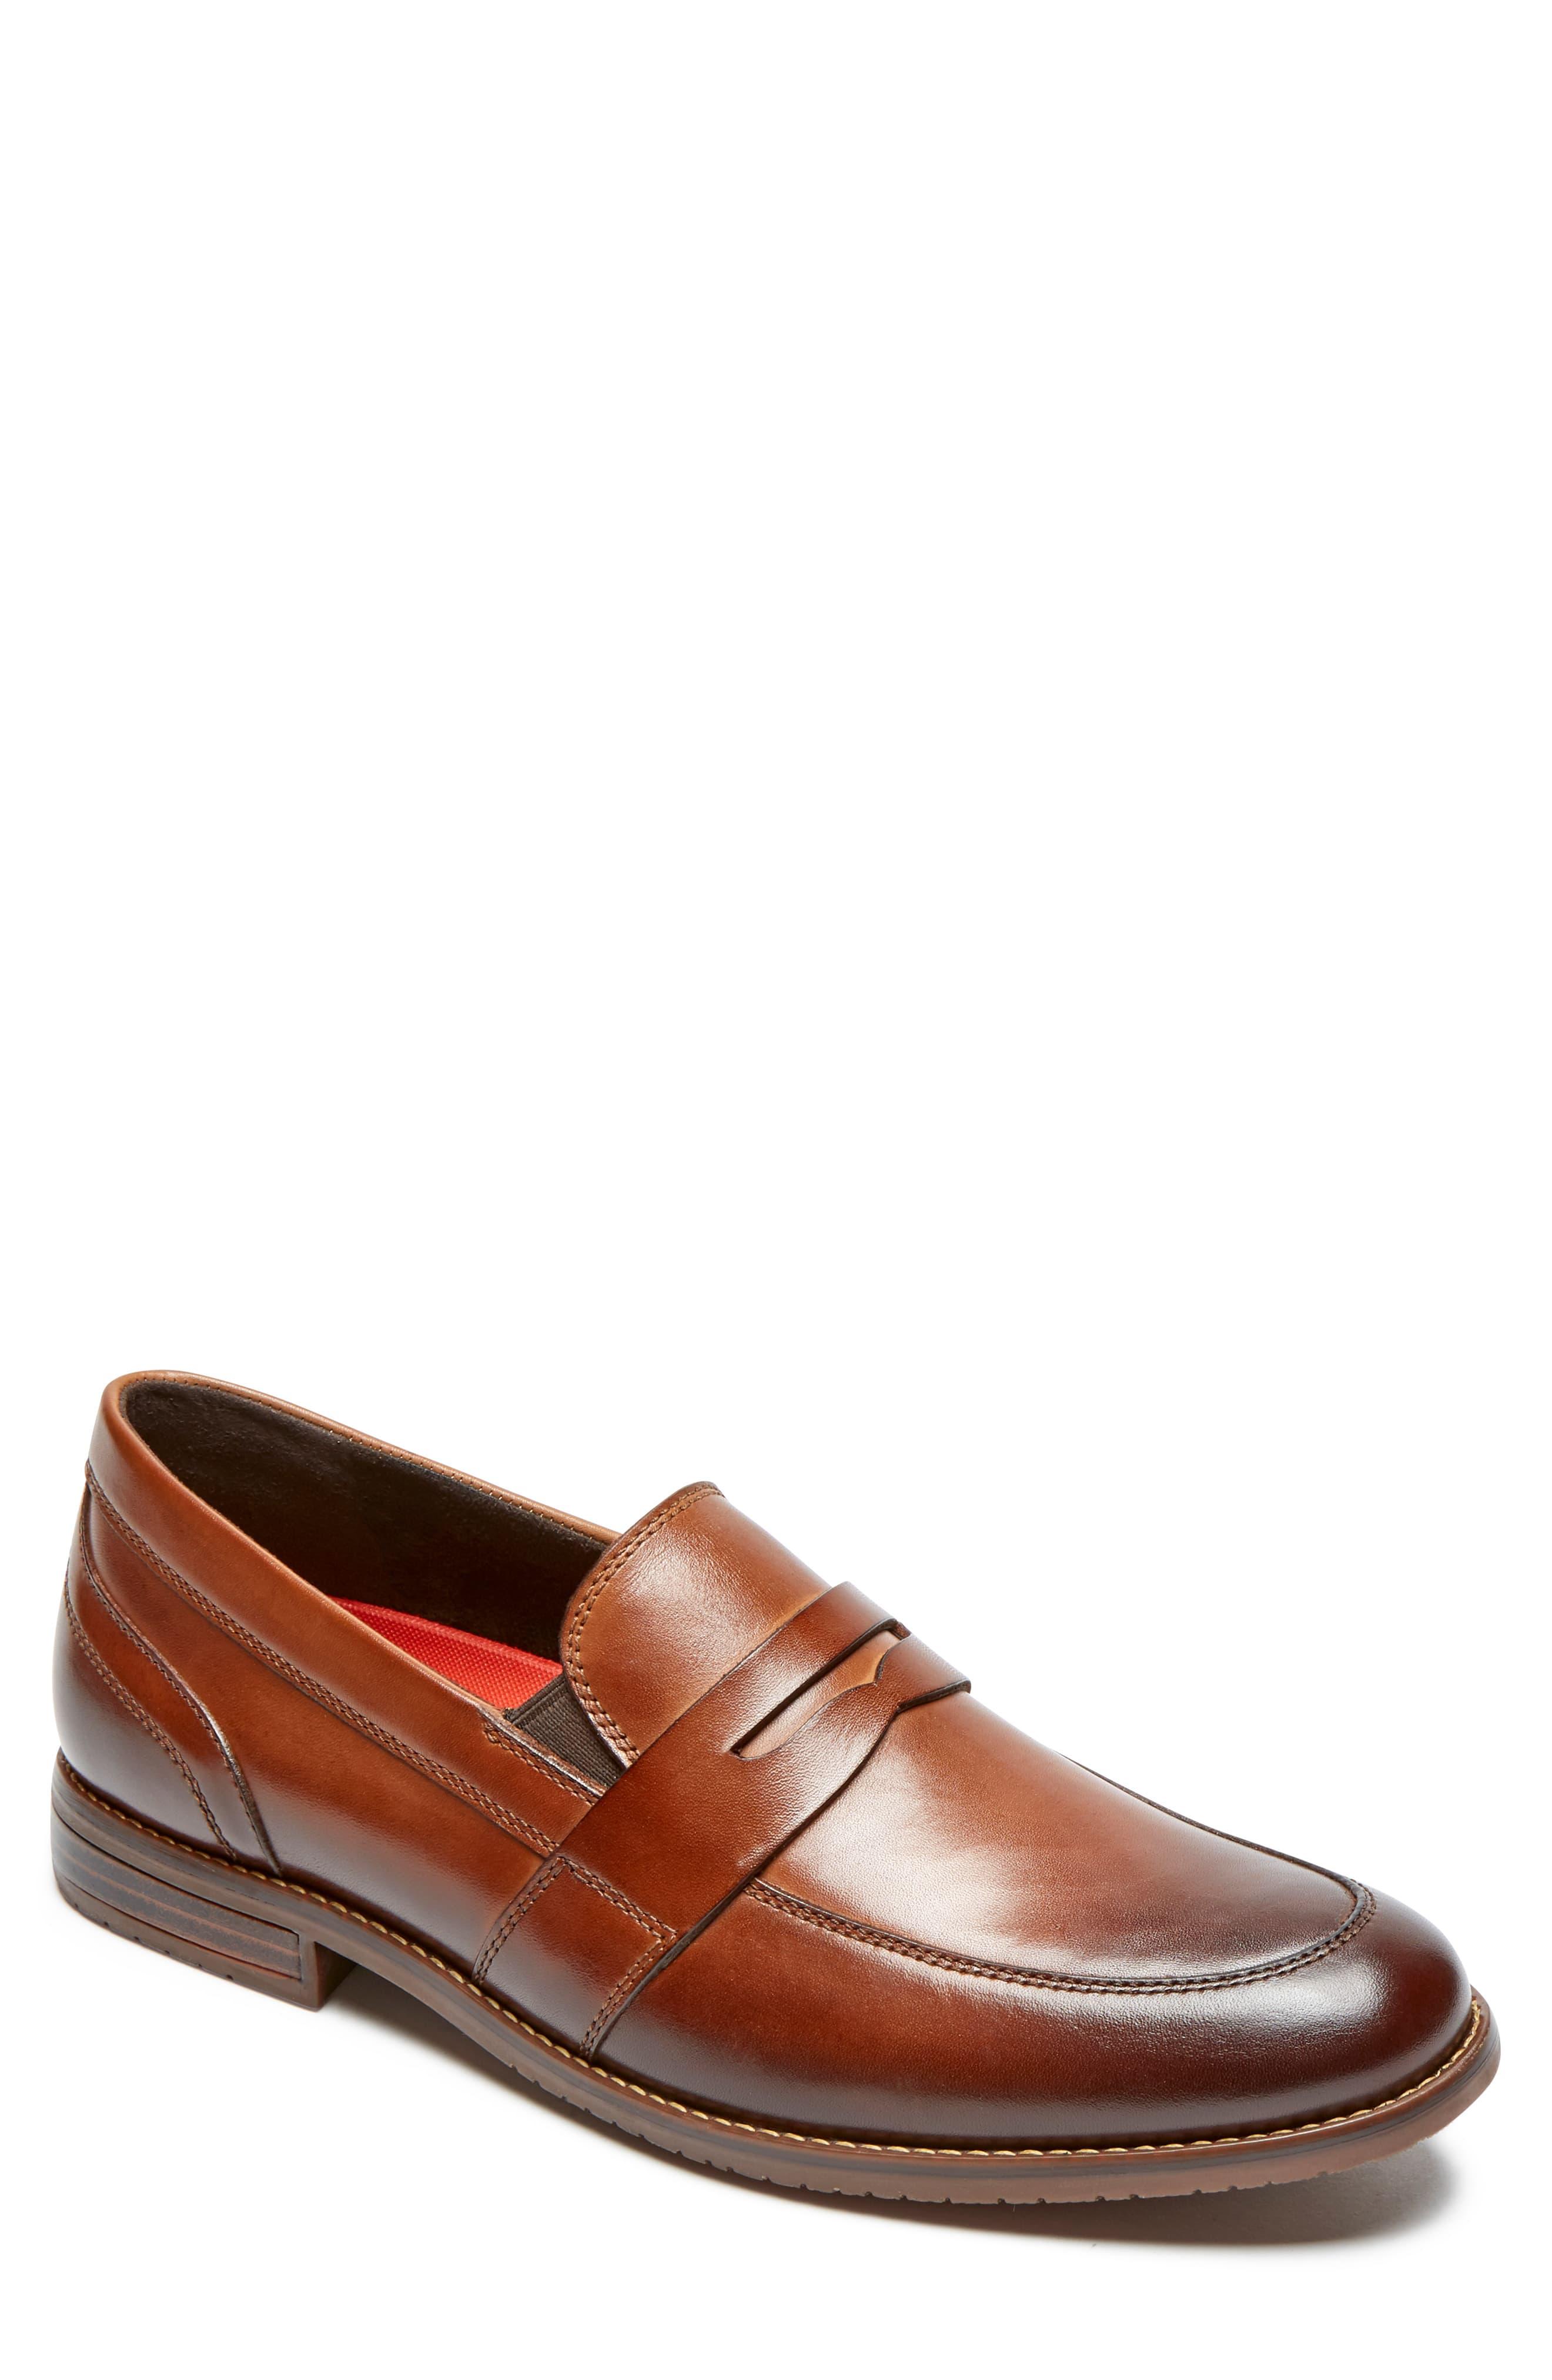 Rockport Leather Sp3 Penny Loafer in Cognac Leather (Brown) for Men ...